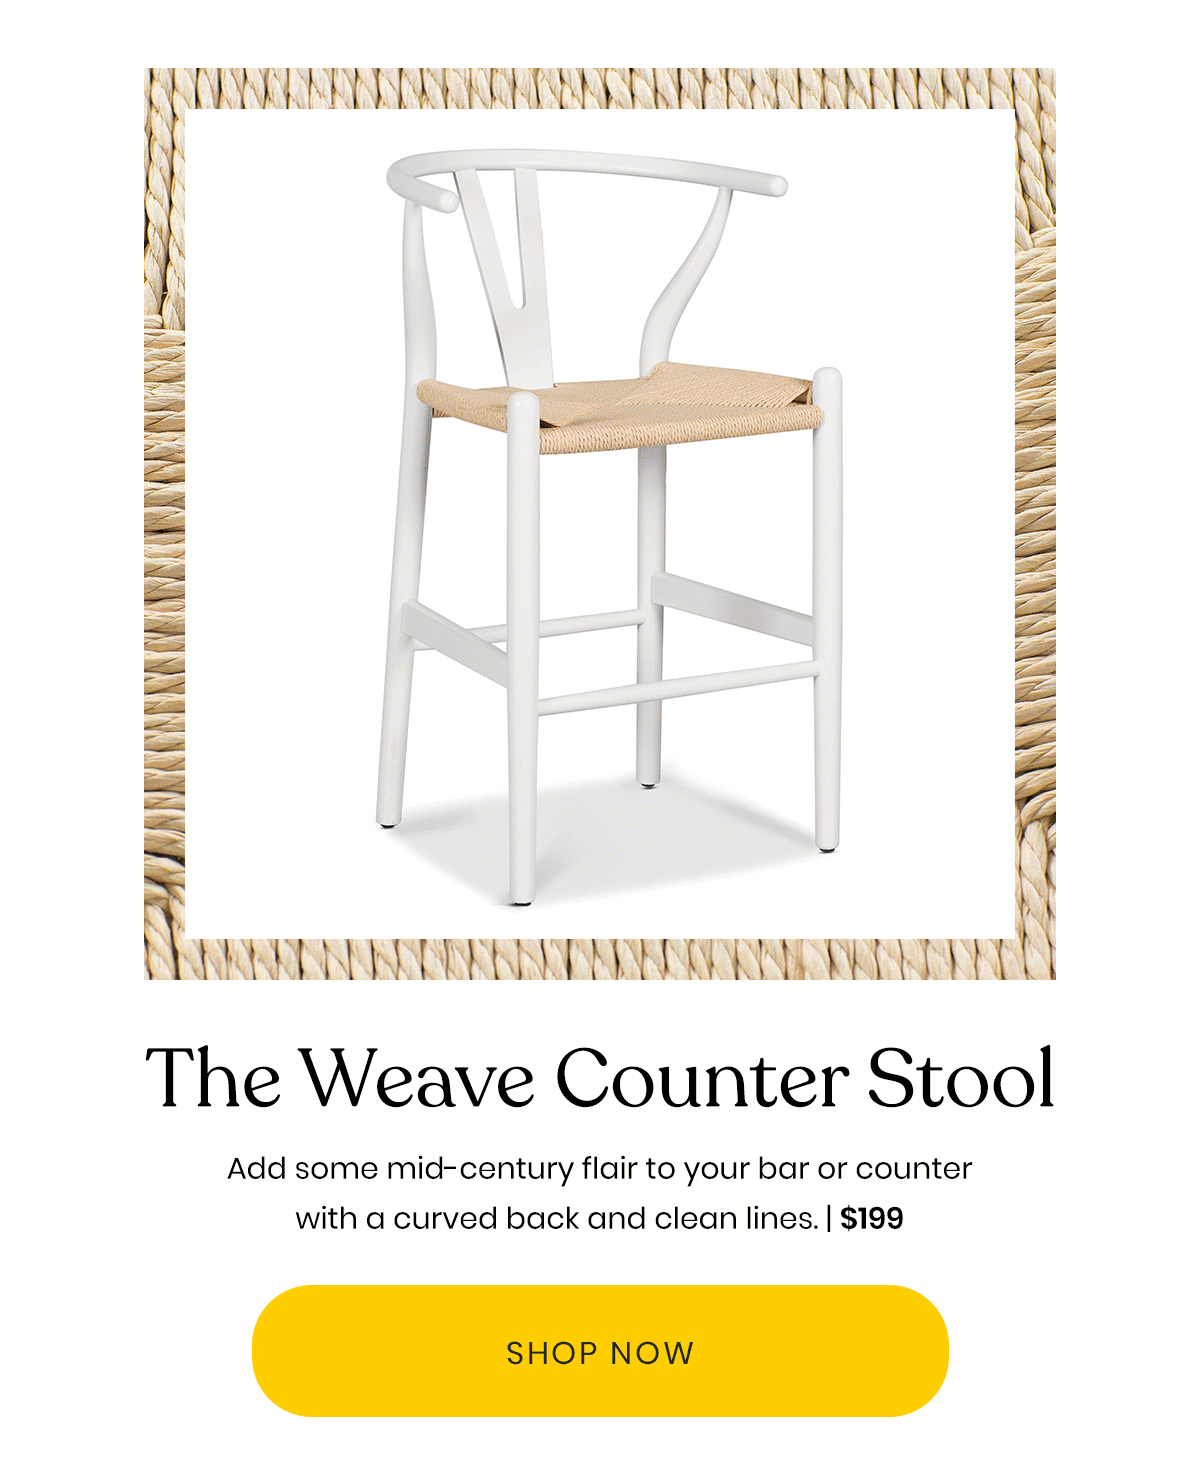 The Weave Counter Stool | Add some mid-century flair to your bar or counter with a curved back and clean lines. | $199 | Shop Now